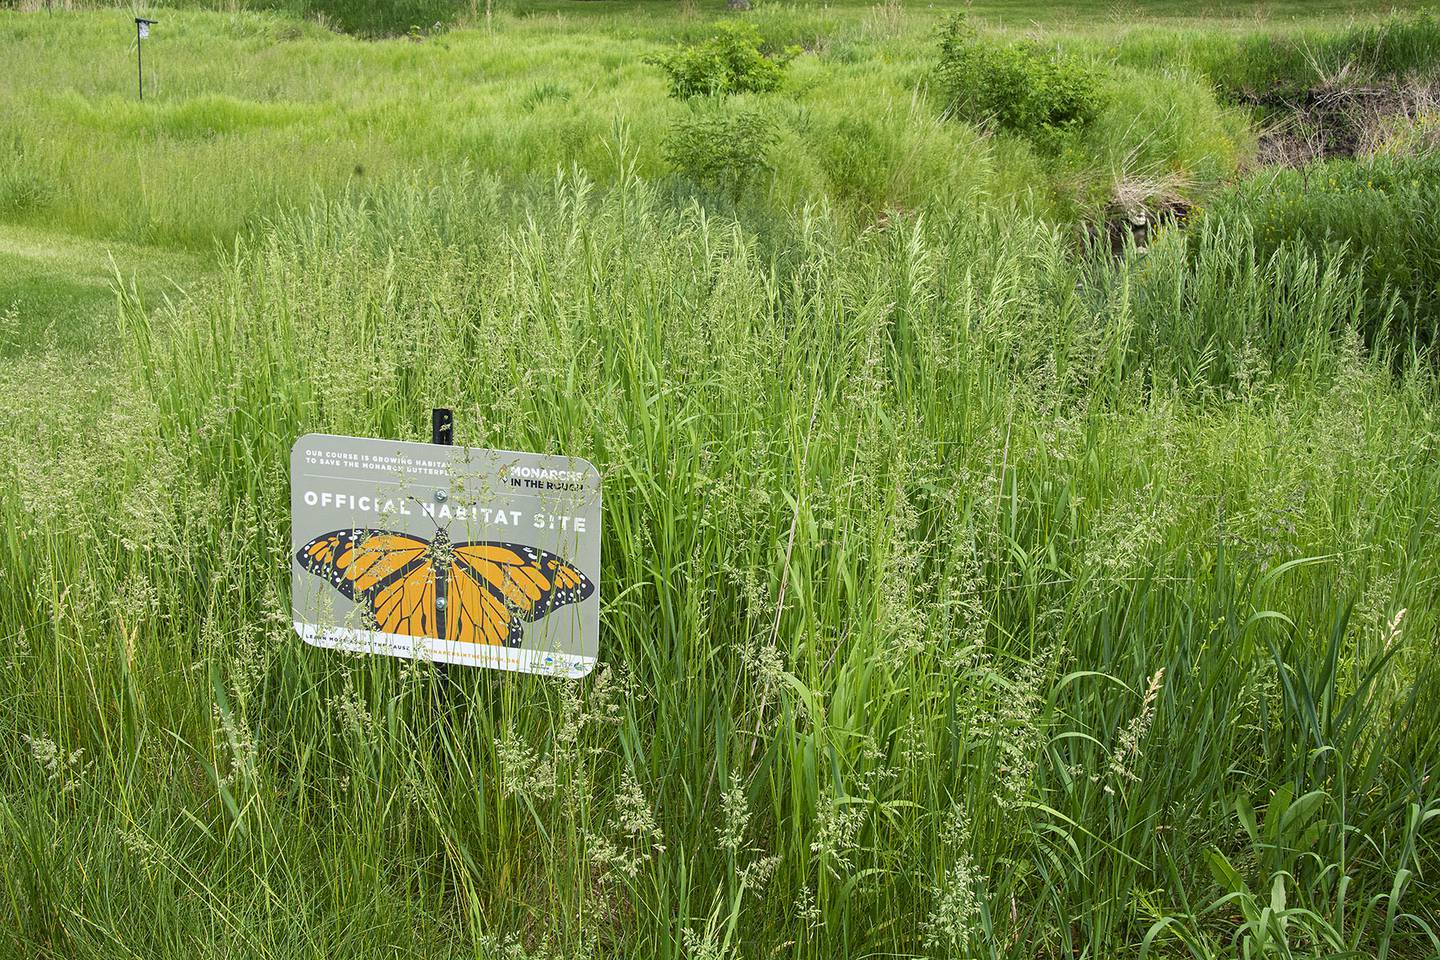 Pictured is a sign at the Carillon Lakes 3-hole golf course showing its inclusion into the Monarchs in the Rough program. Five years ago, residents at the gated community for active adults 55 and up started restoring unused areas of the golf course to its natural habitat.